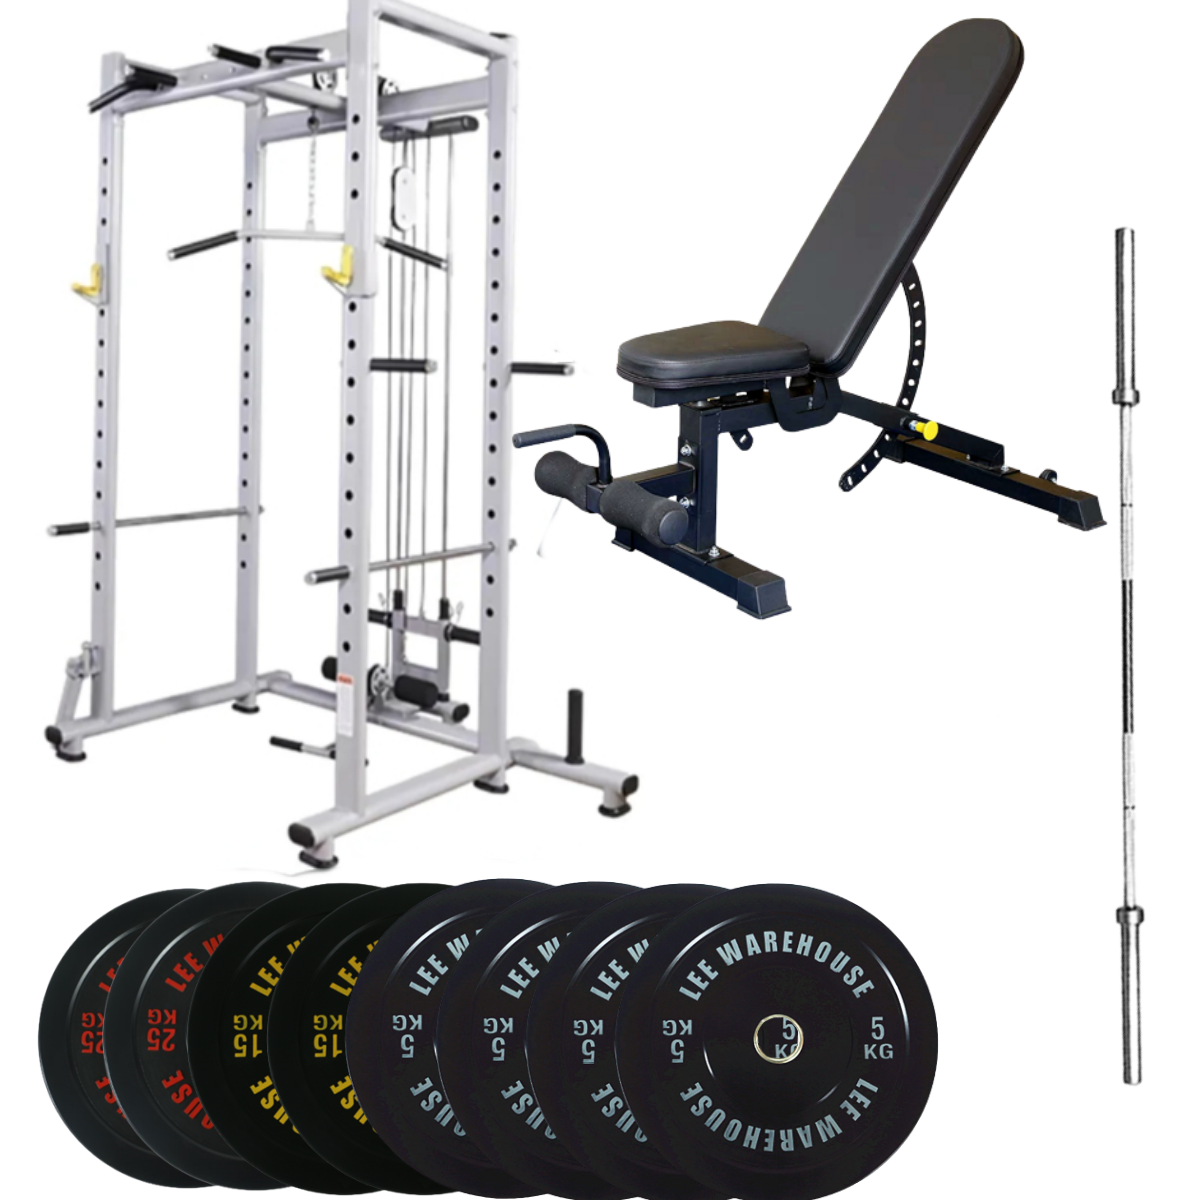 Home Gym Set |Power cage+Bench+Barbell+Weights